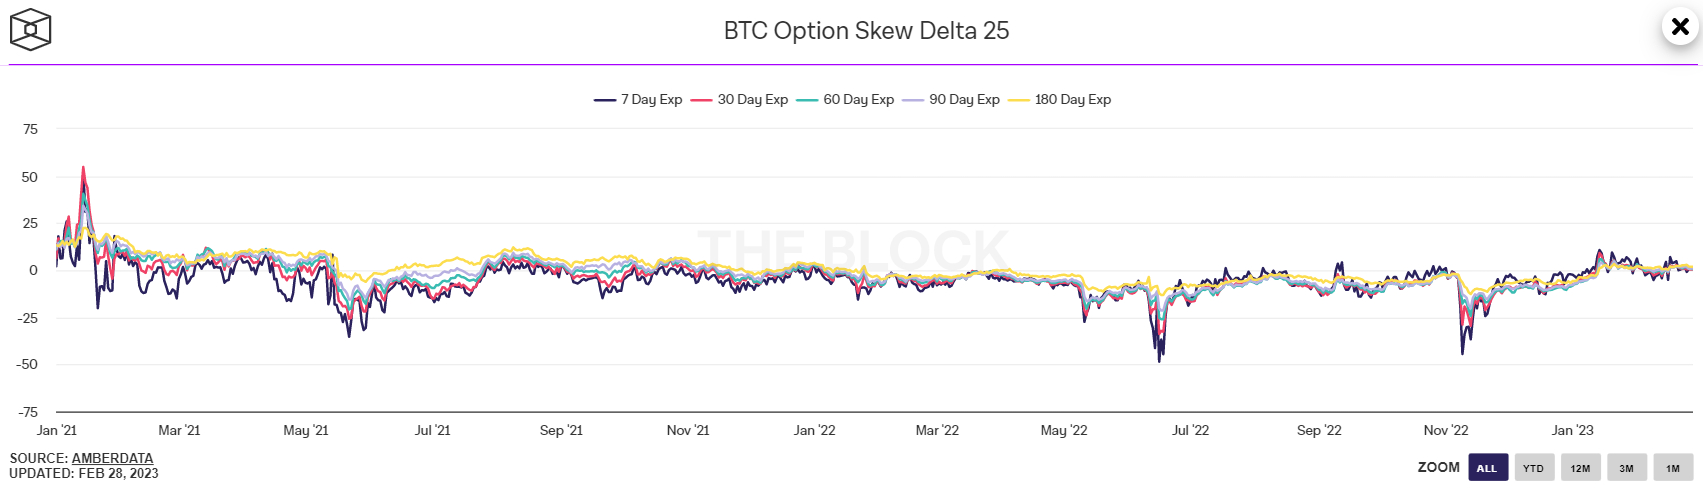 Bitcoin Volatility Expectations Fall Sharply After BTC Price Failure to Break $25K4